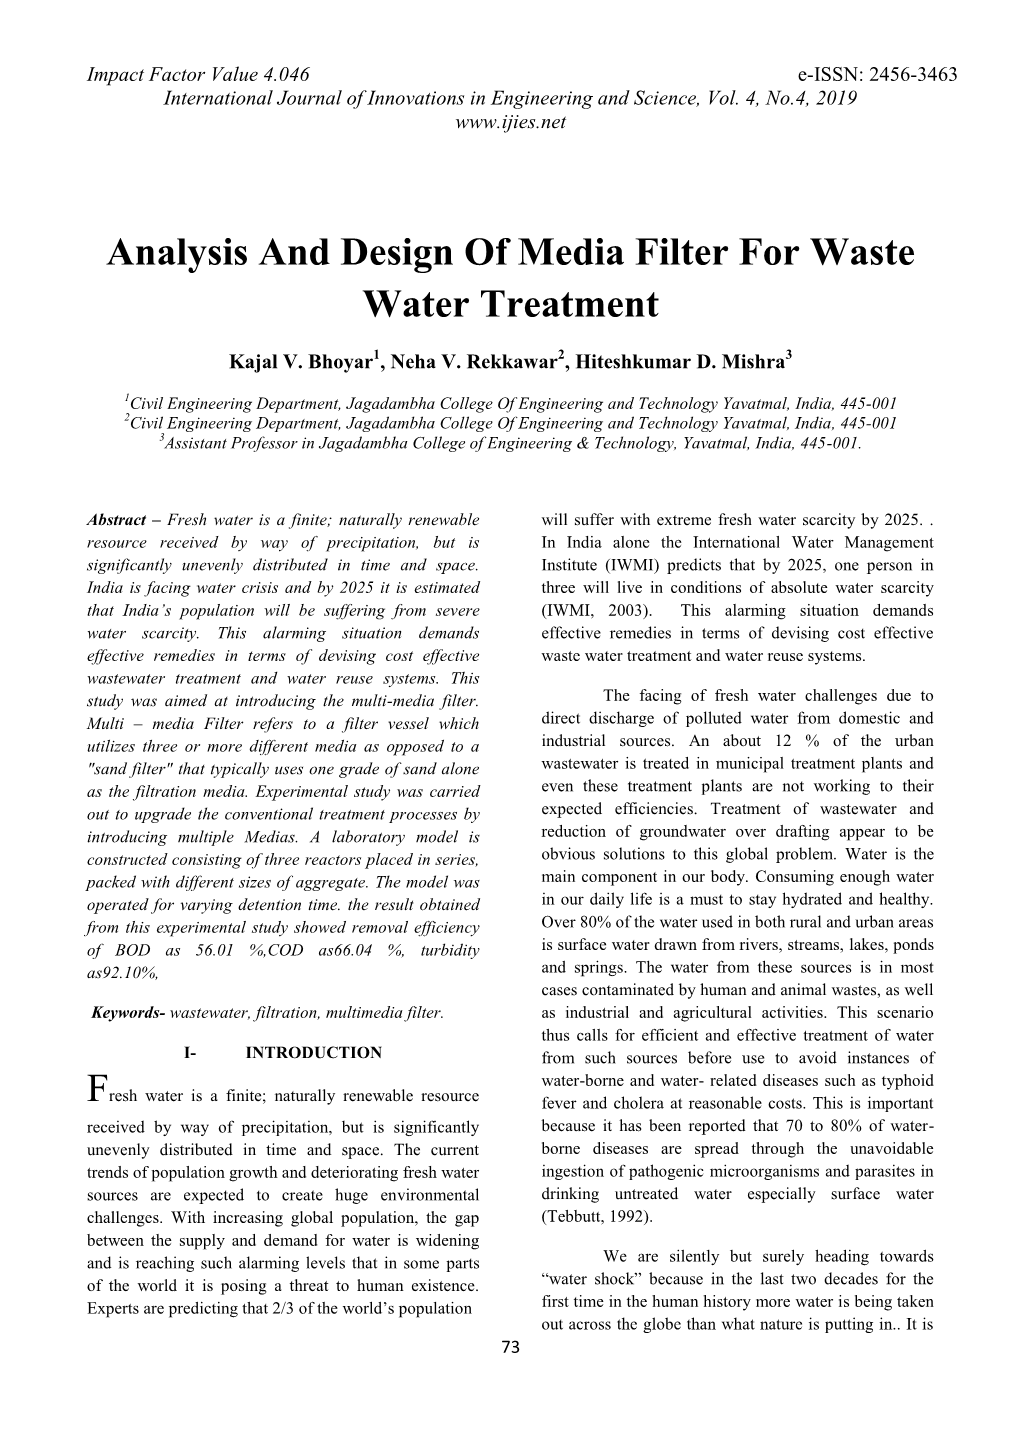 Analysis and Design of Media Filter for Waste Water Treatment